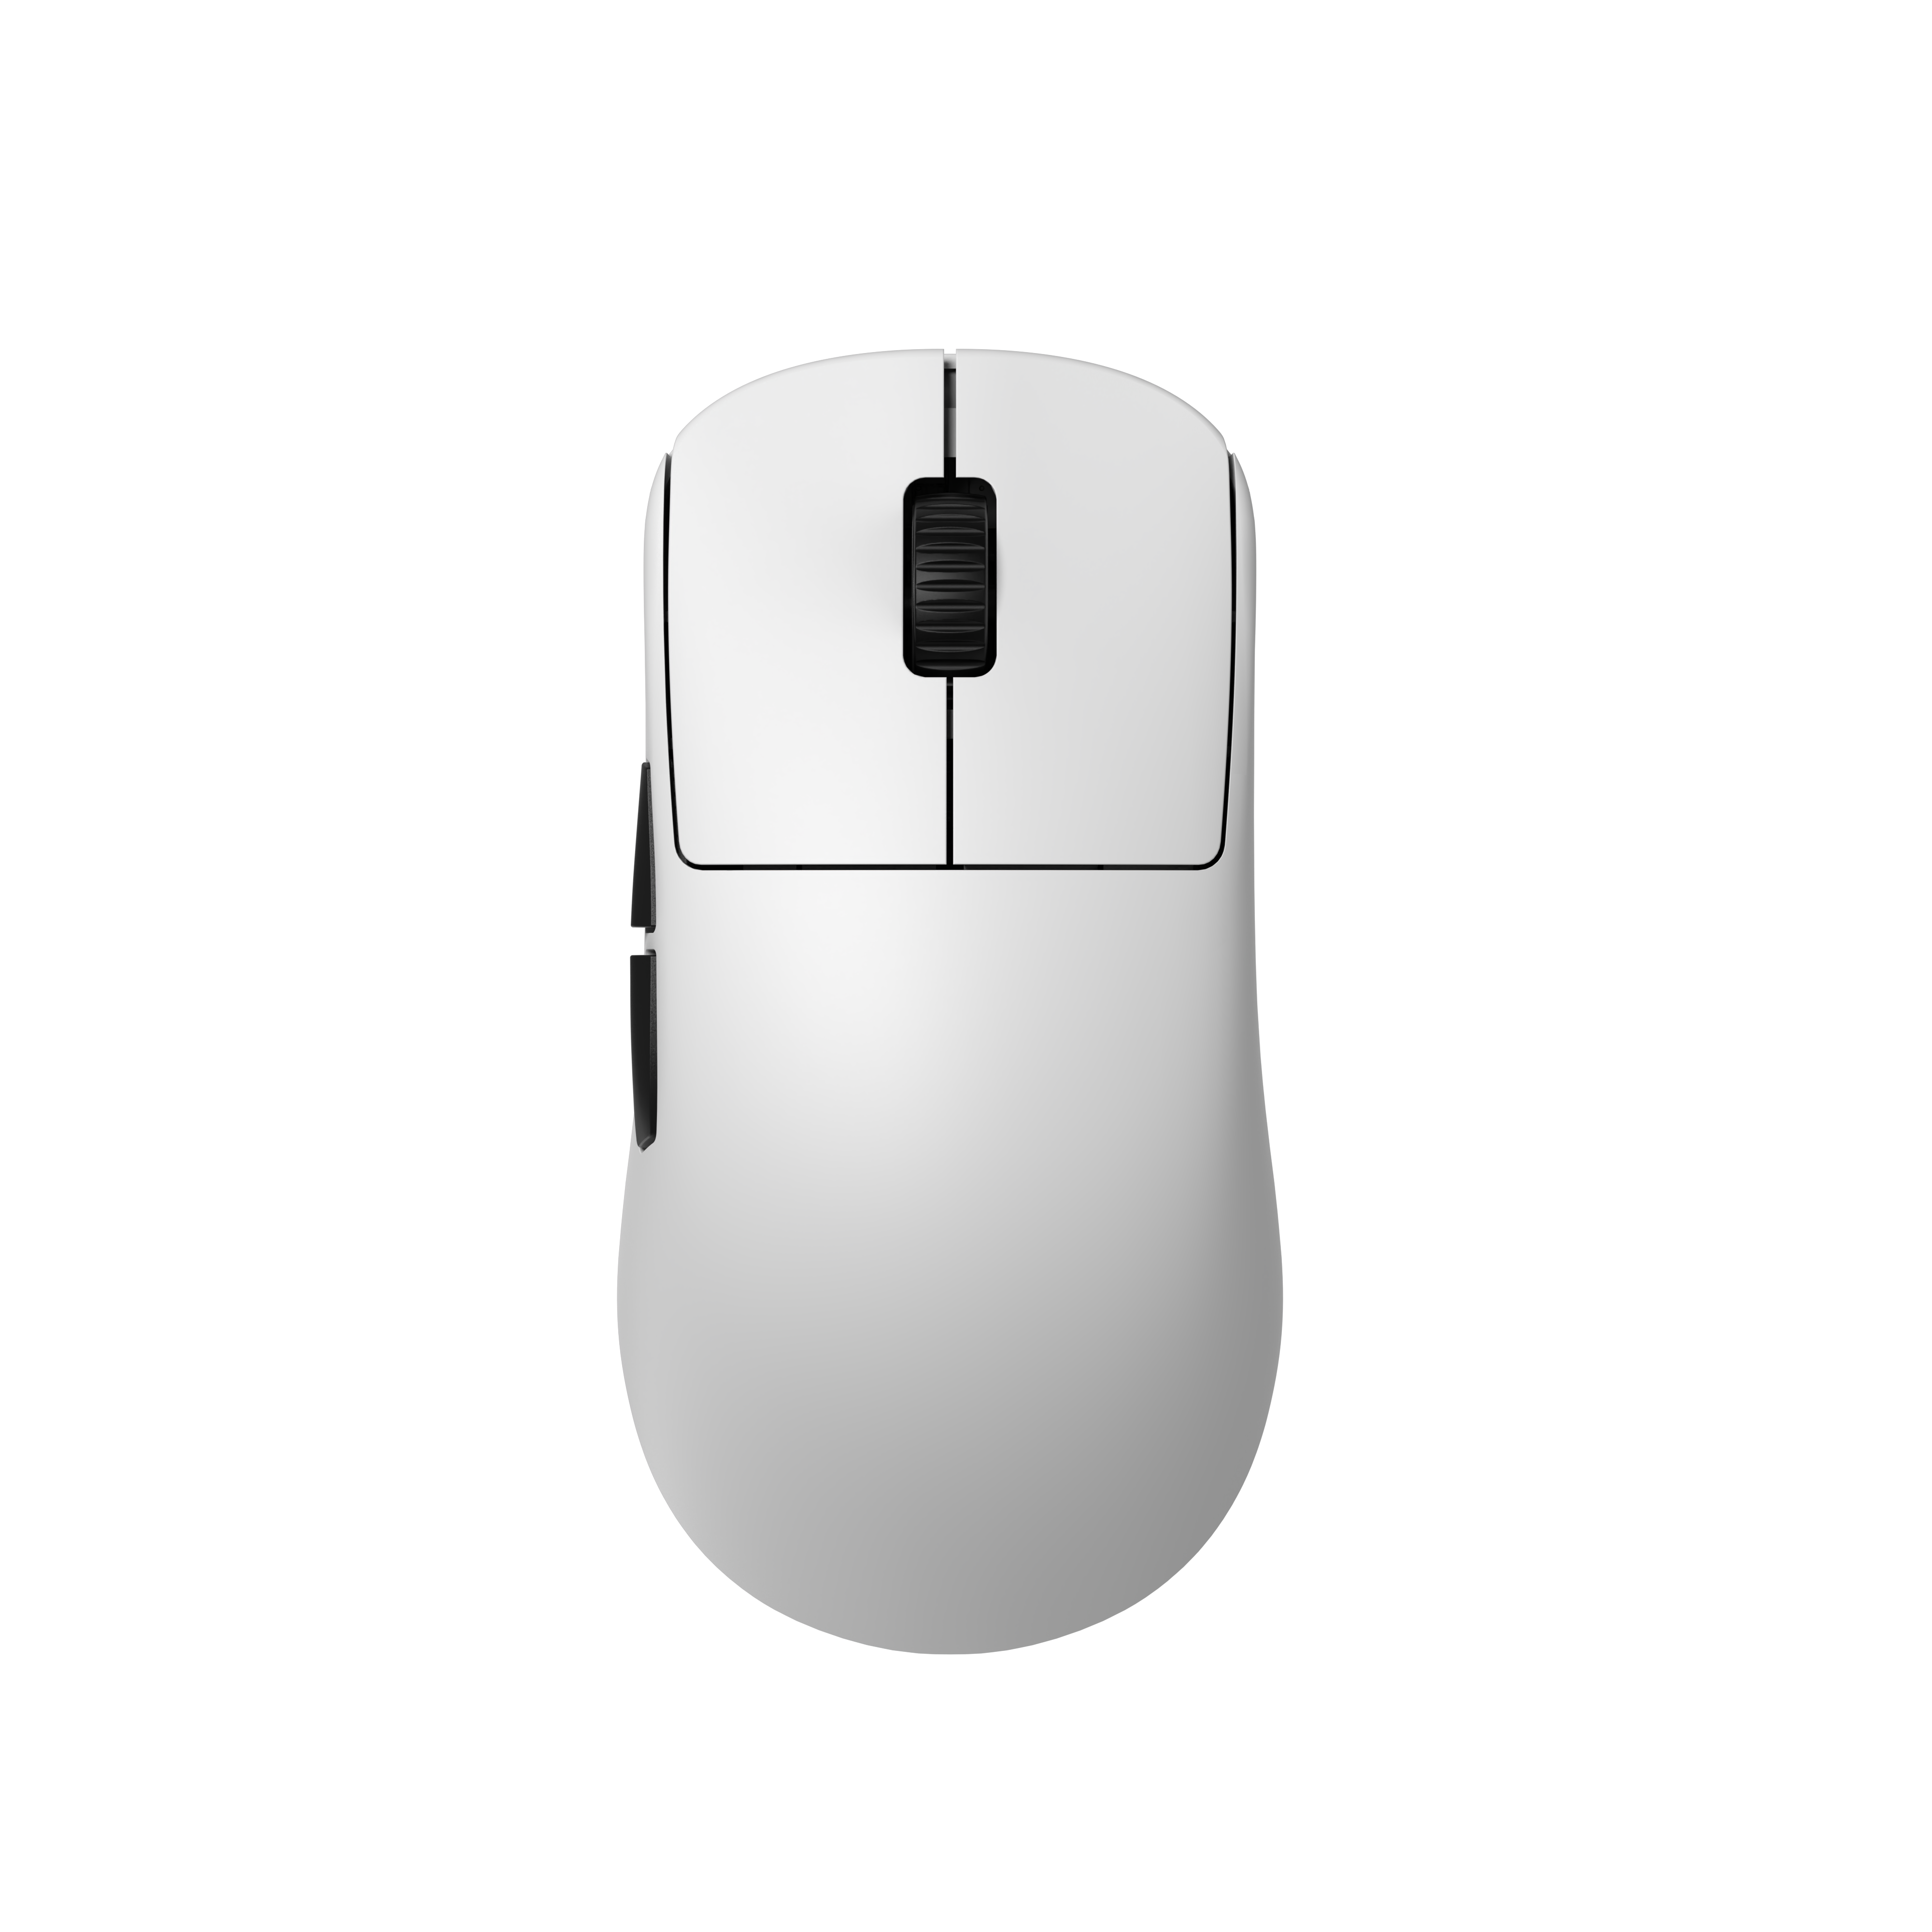 OP1we Gaming Mouse - White